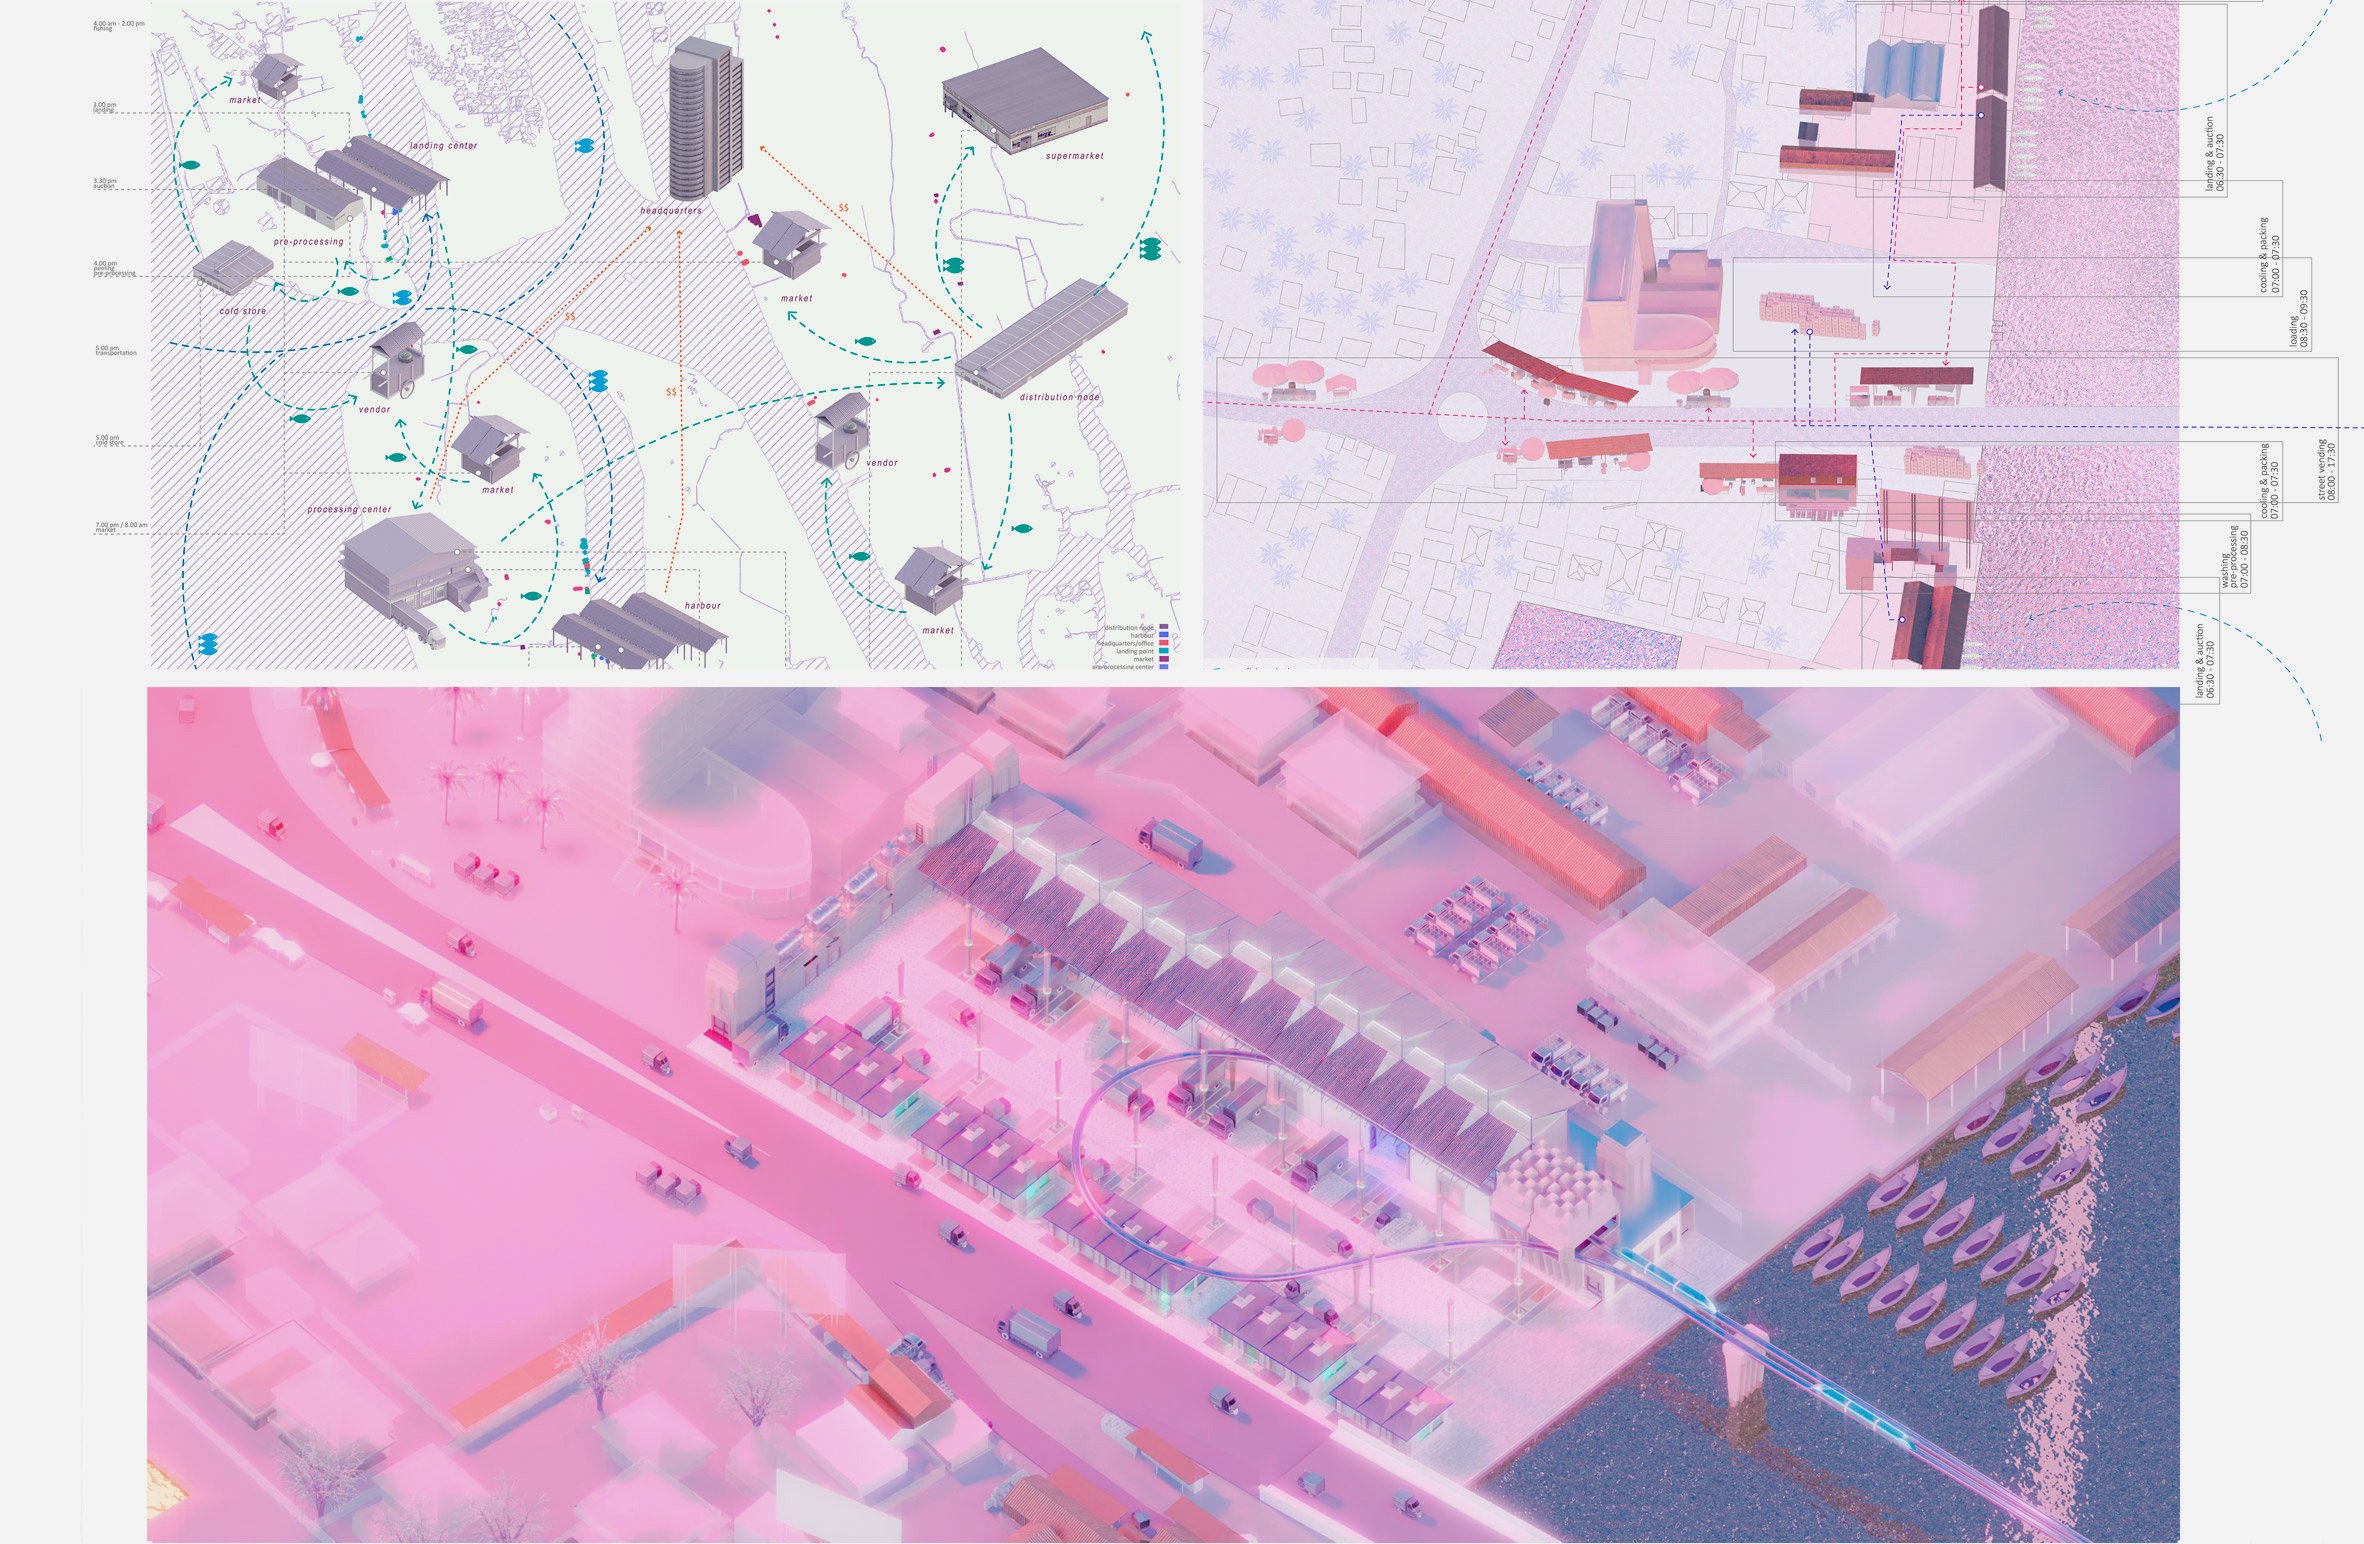 Pink and purple-hued series of architectural diagrams